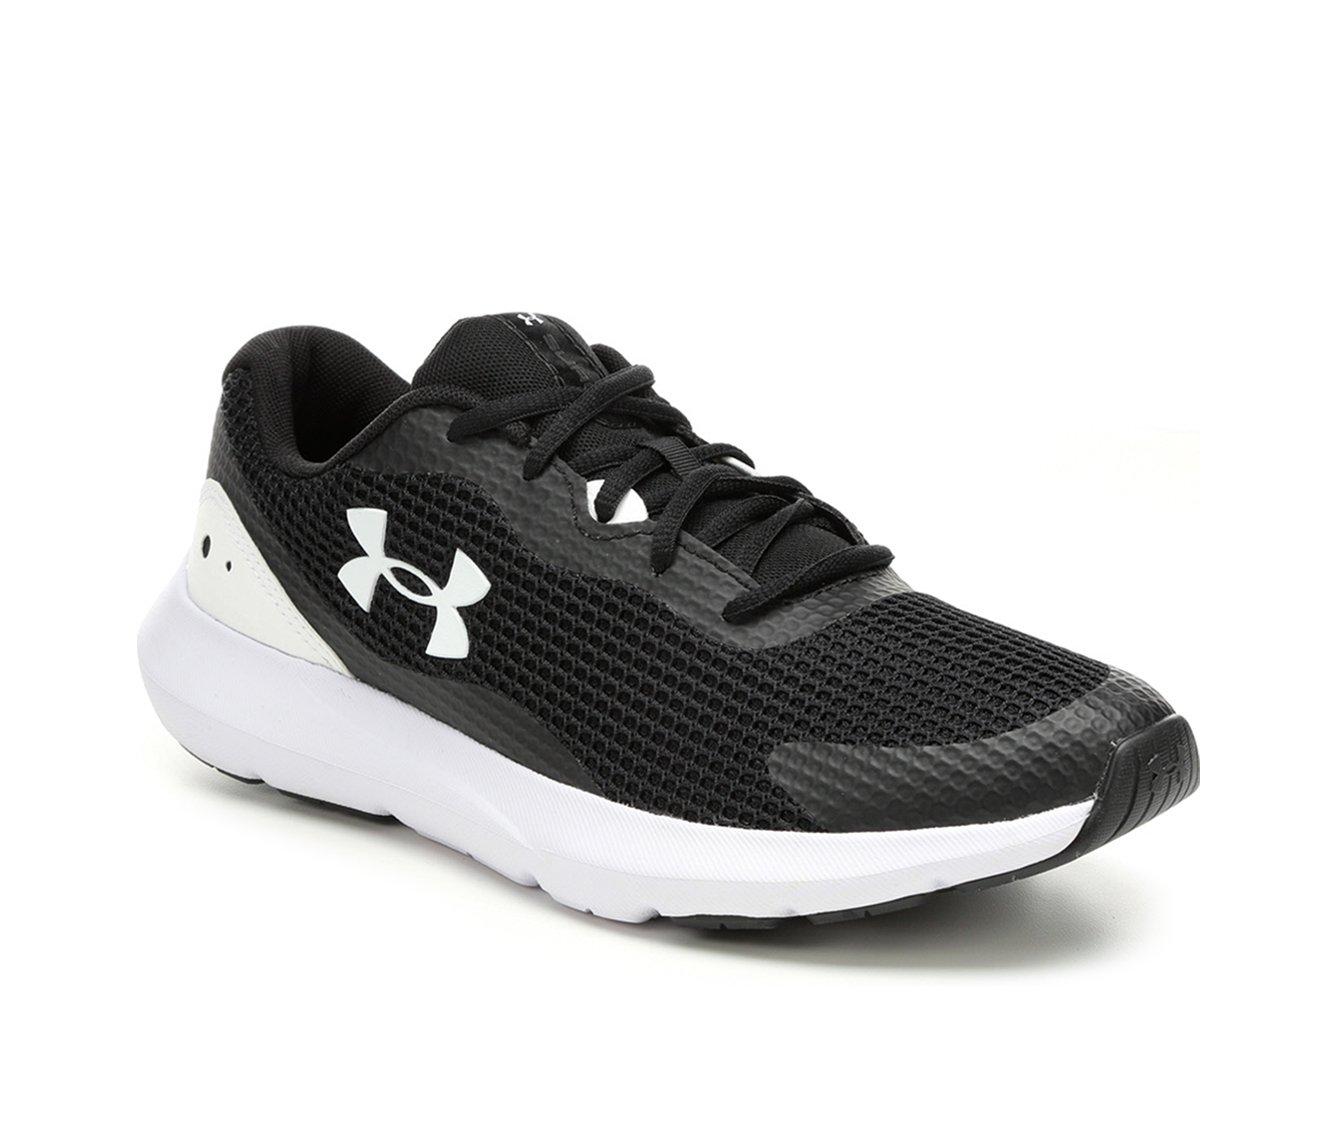 Men's Under Armour Surge 3 Running Shoes |